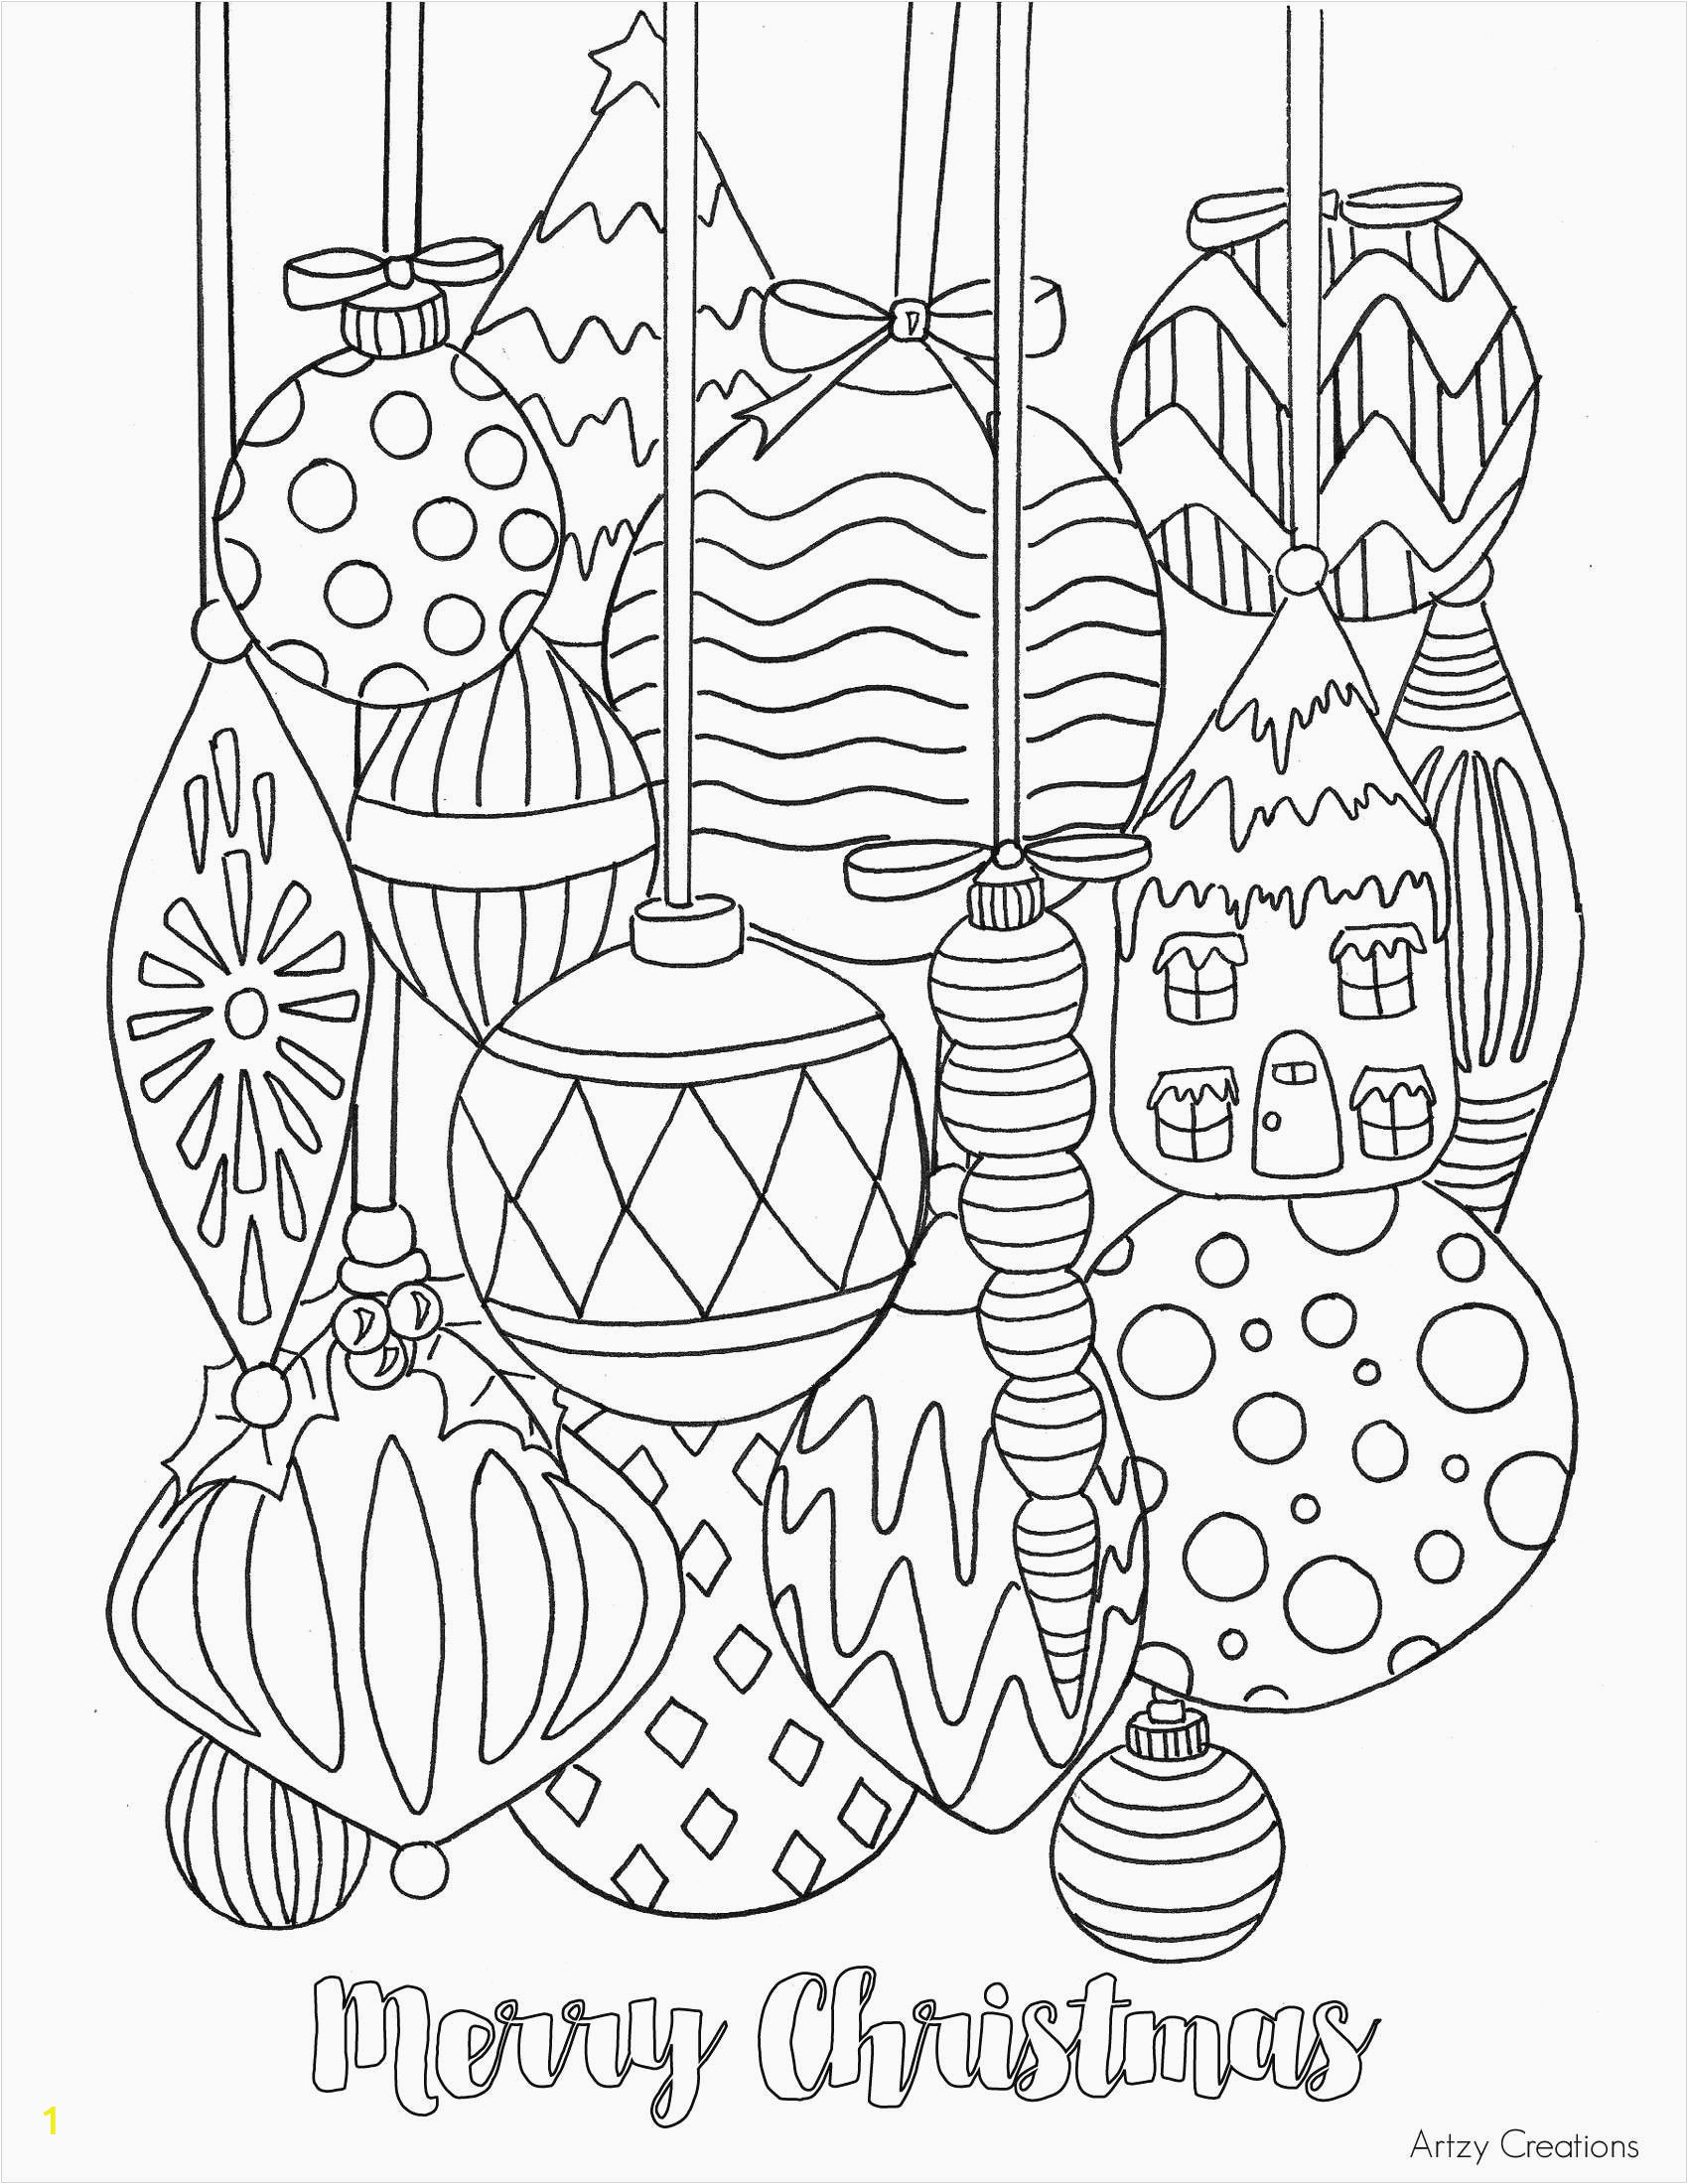 Wrestling Coloring Pages to Print Coloring Books Coloring Page Template Printing Colouring